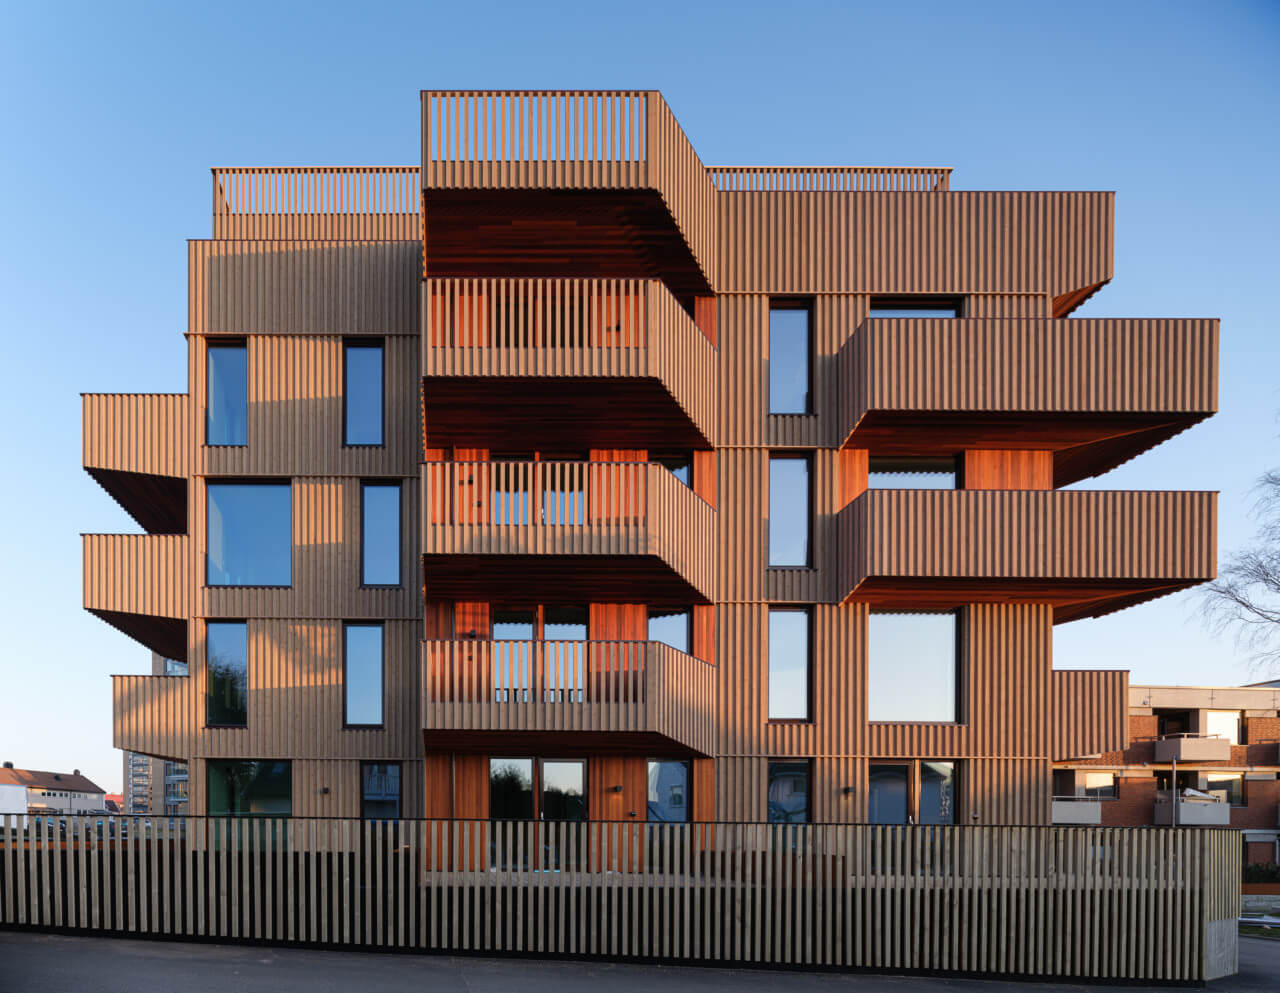 elevation of a timber-clad apartment building